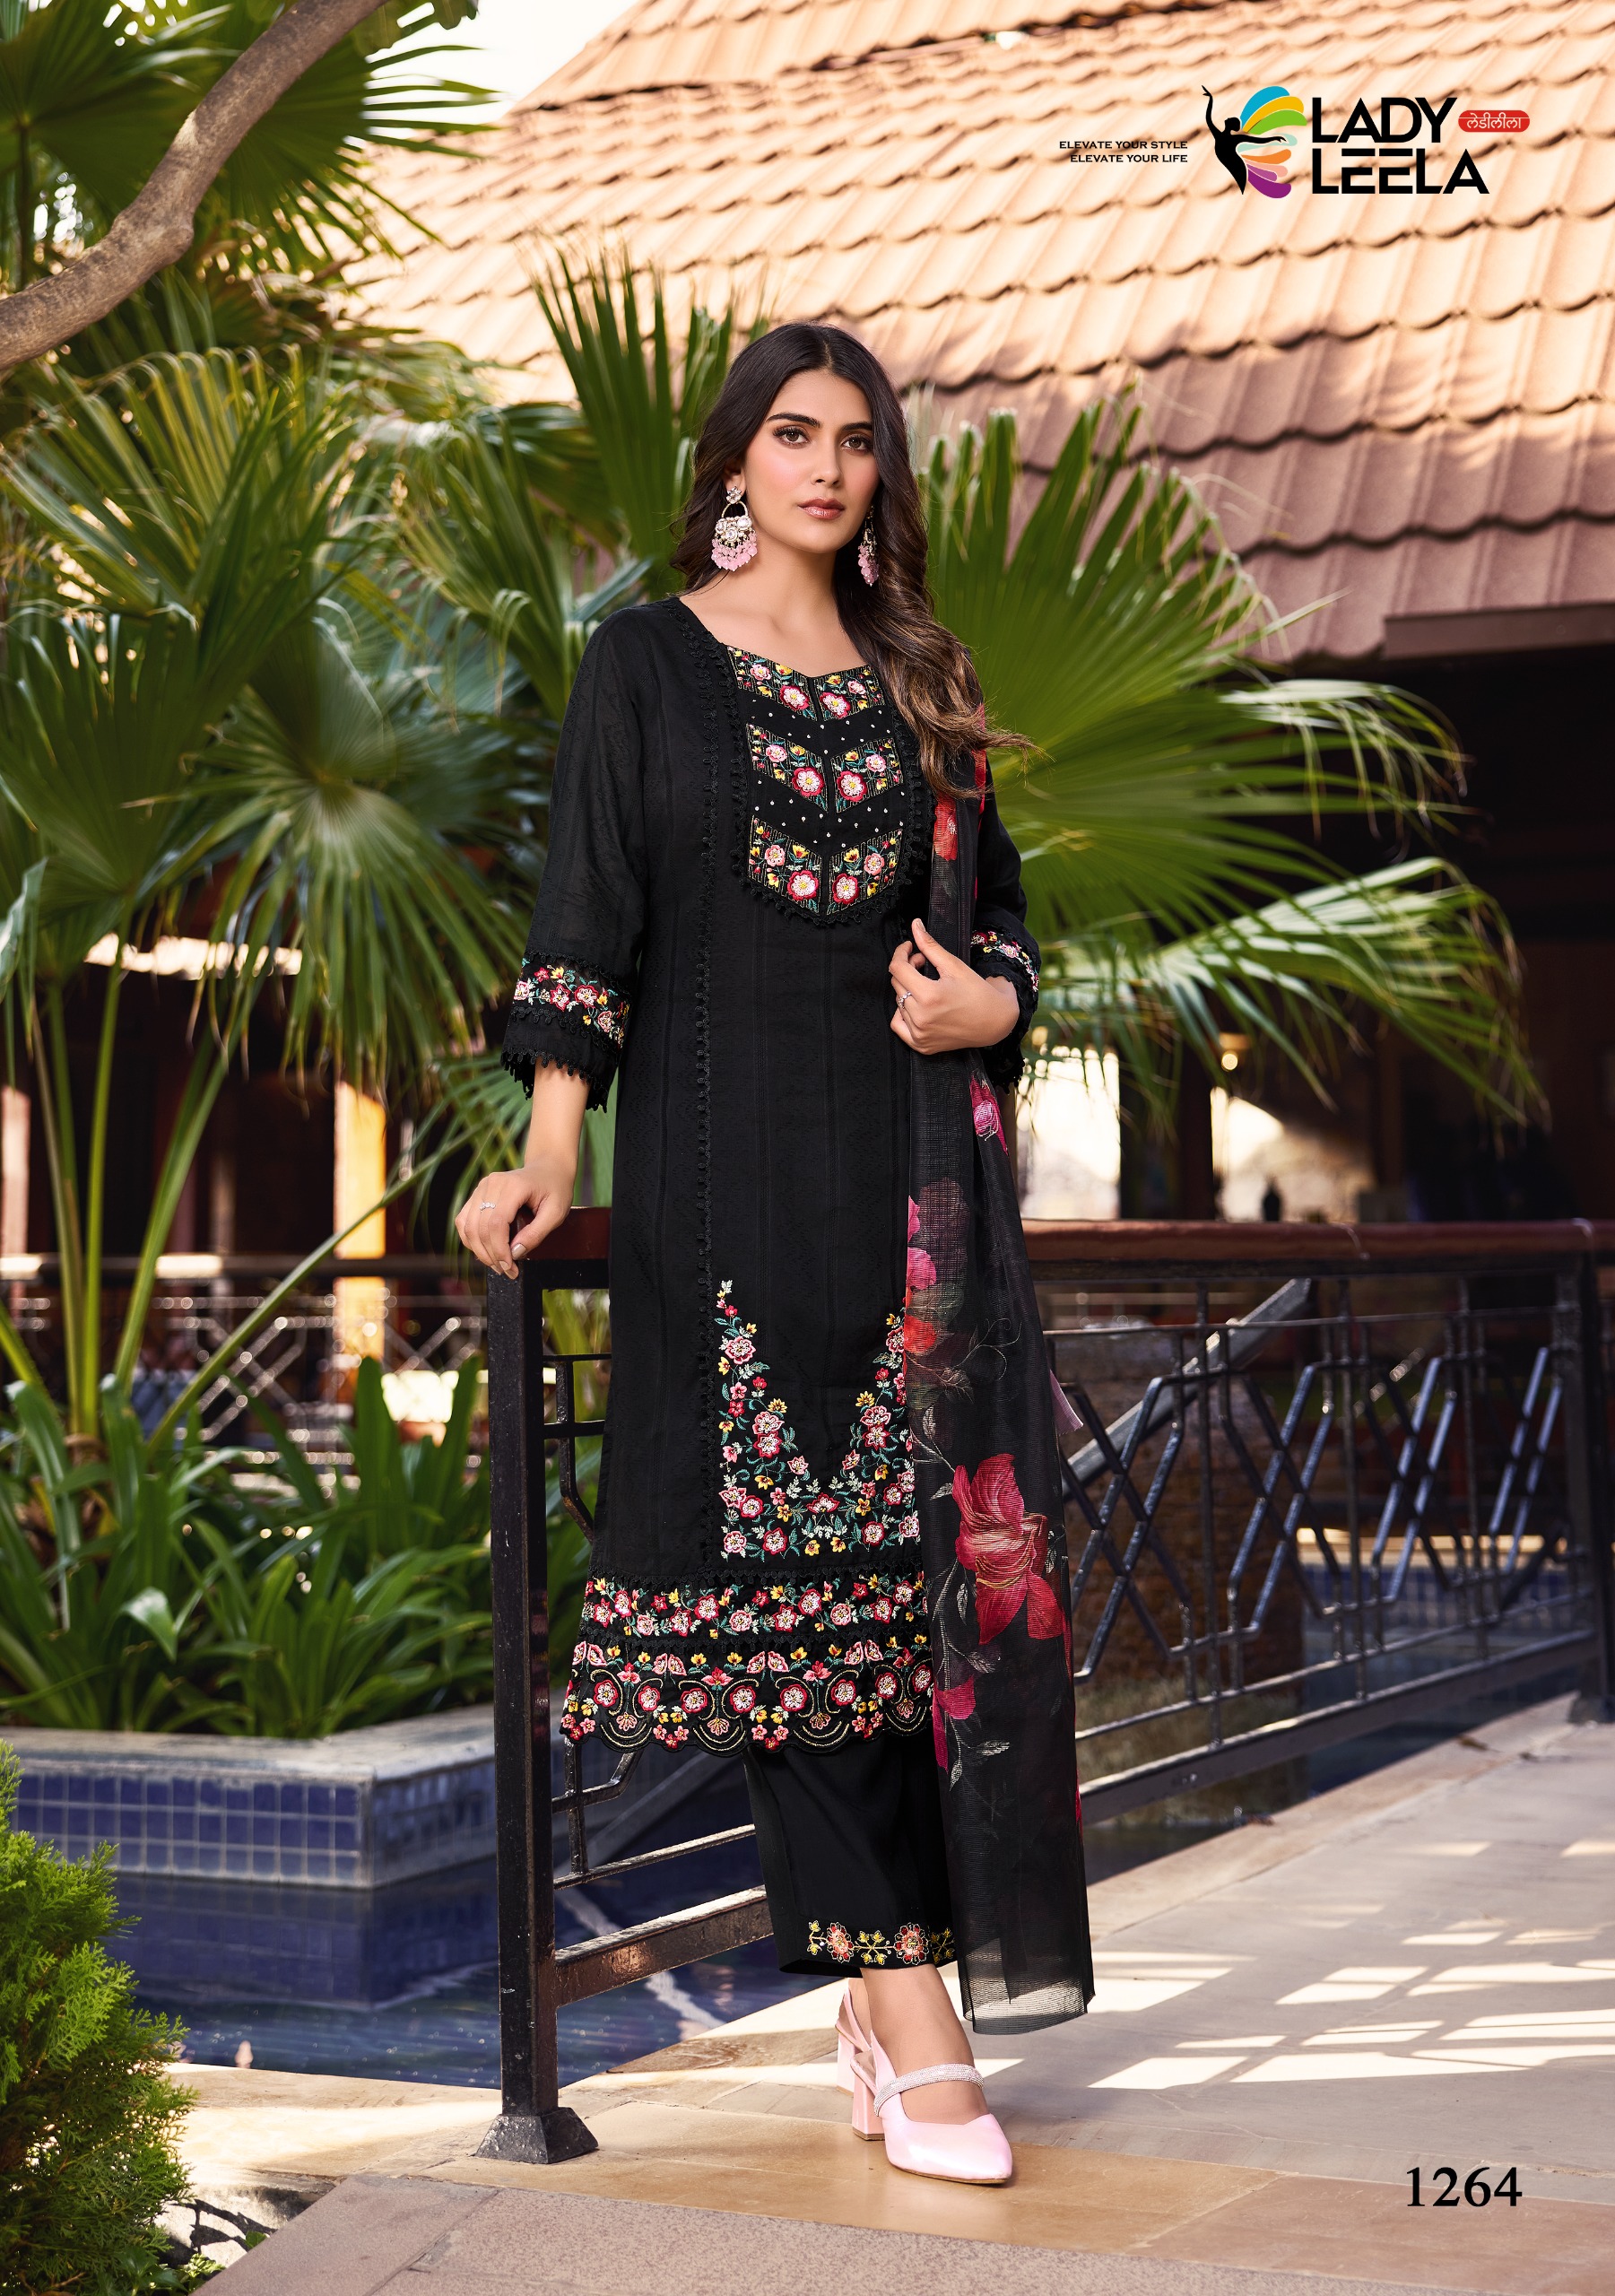 Lady Leela Summer Trends collection 5